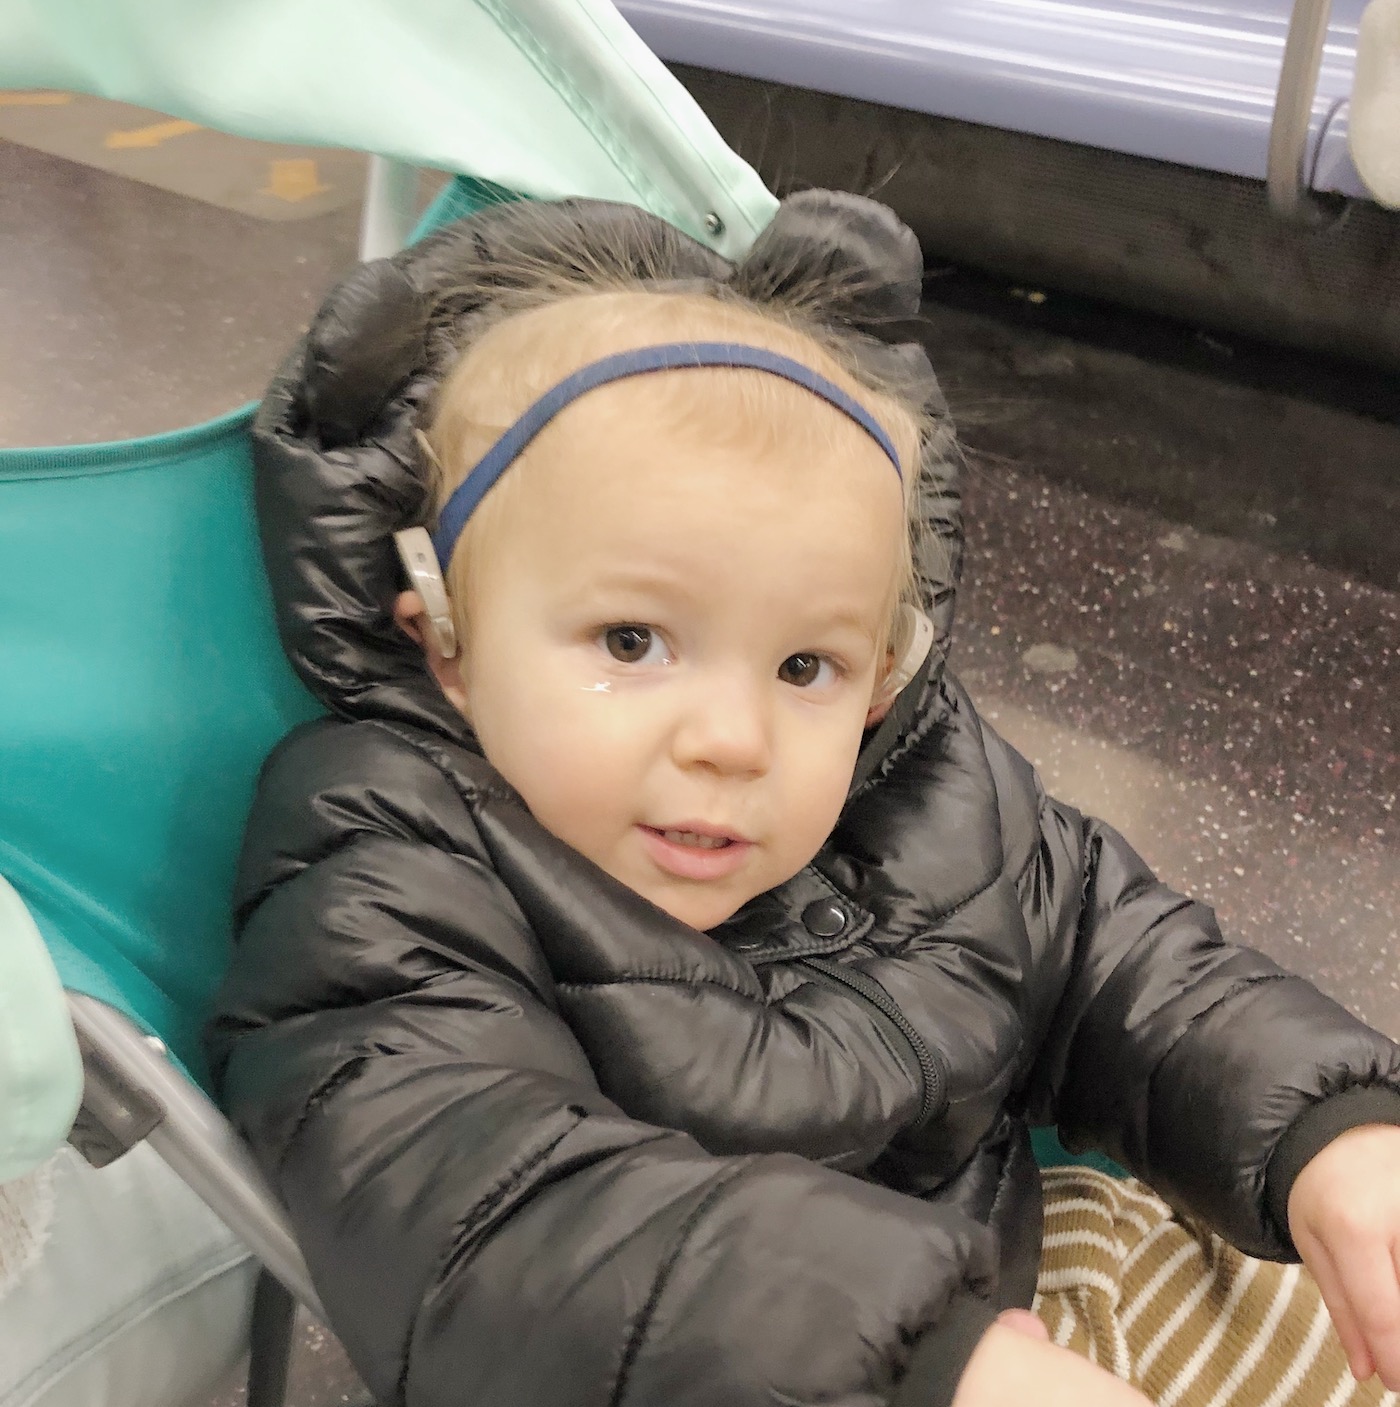 Travel Tips for NYC in the winter with kids